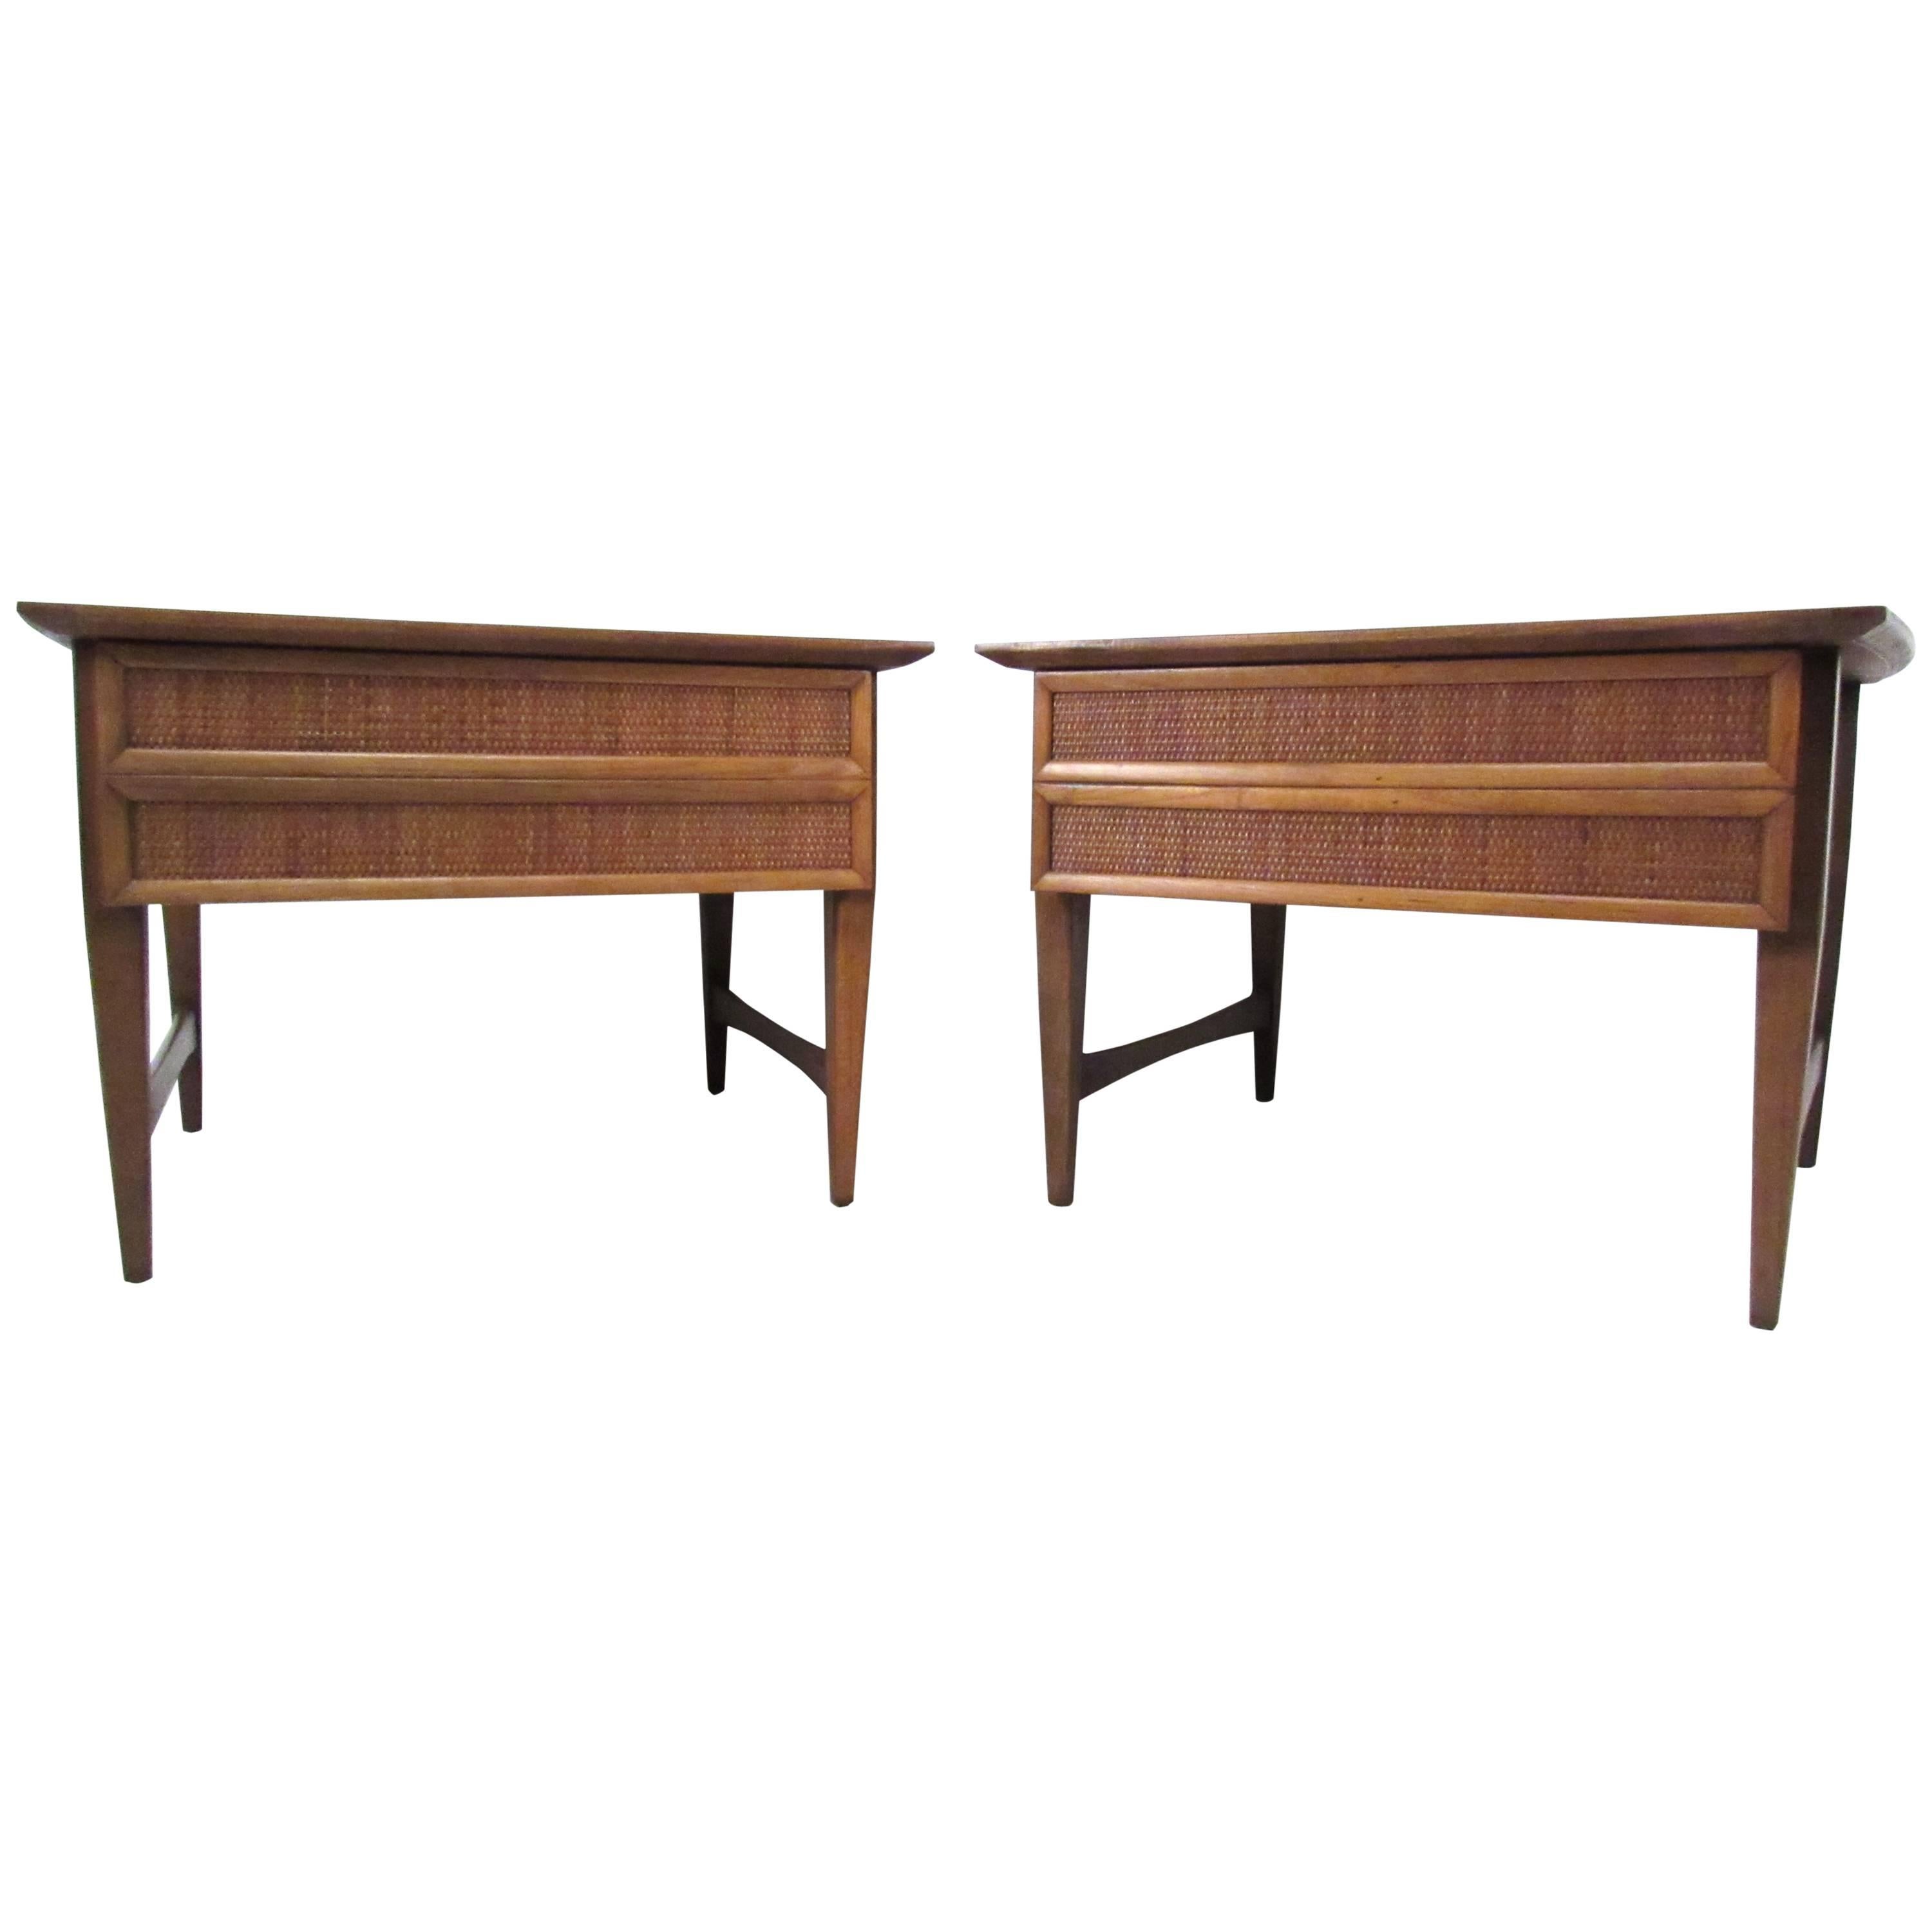 Pair of Mid-Century Modern Cane Front End Tables by Lane For Sale